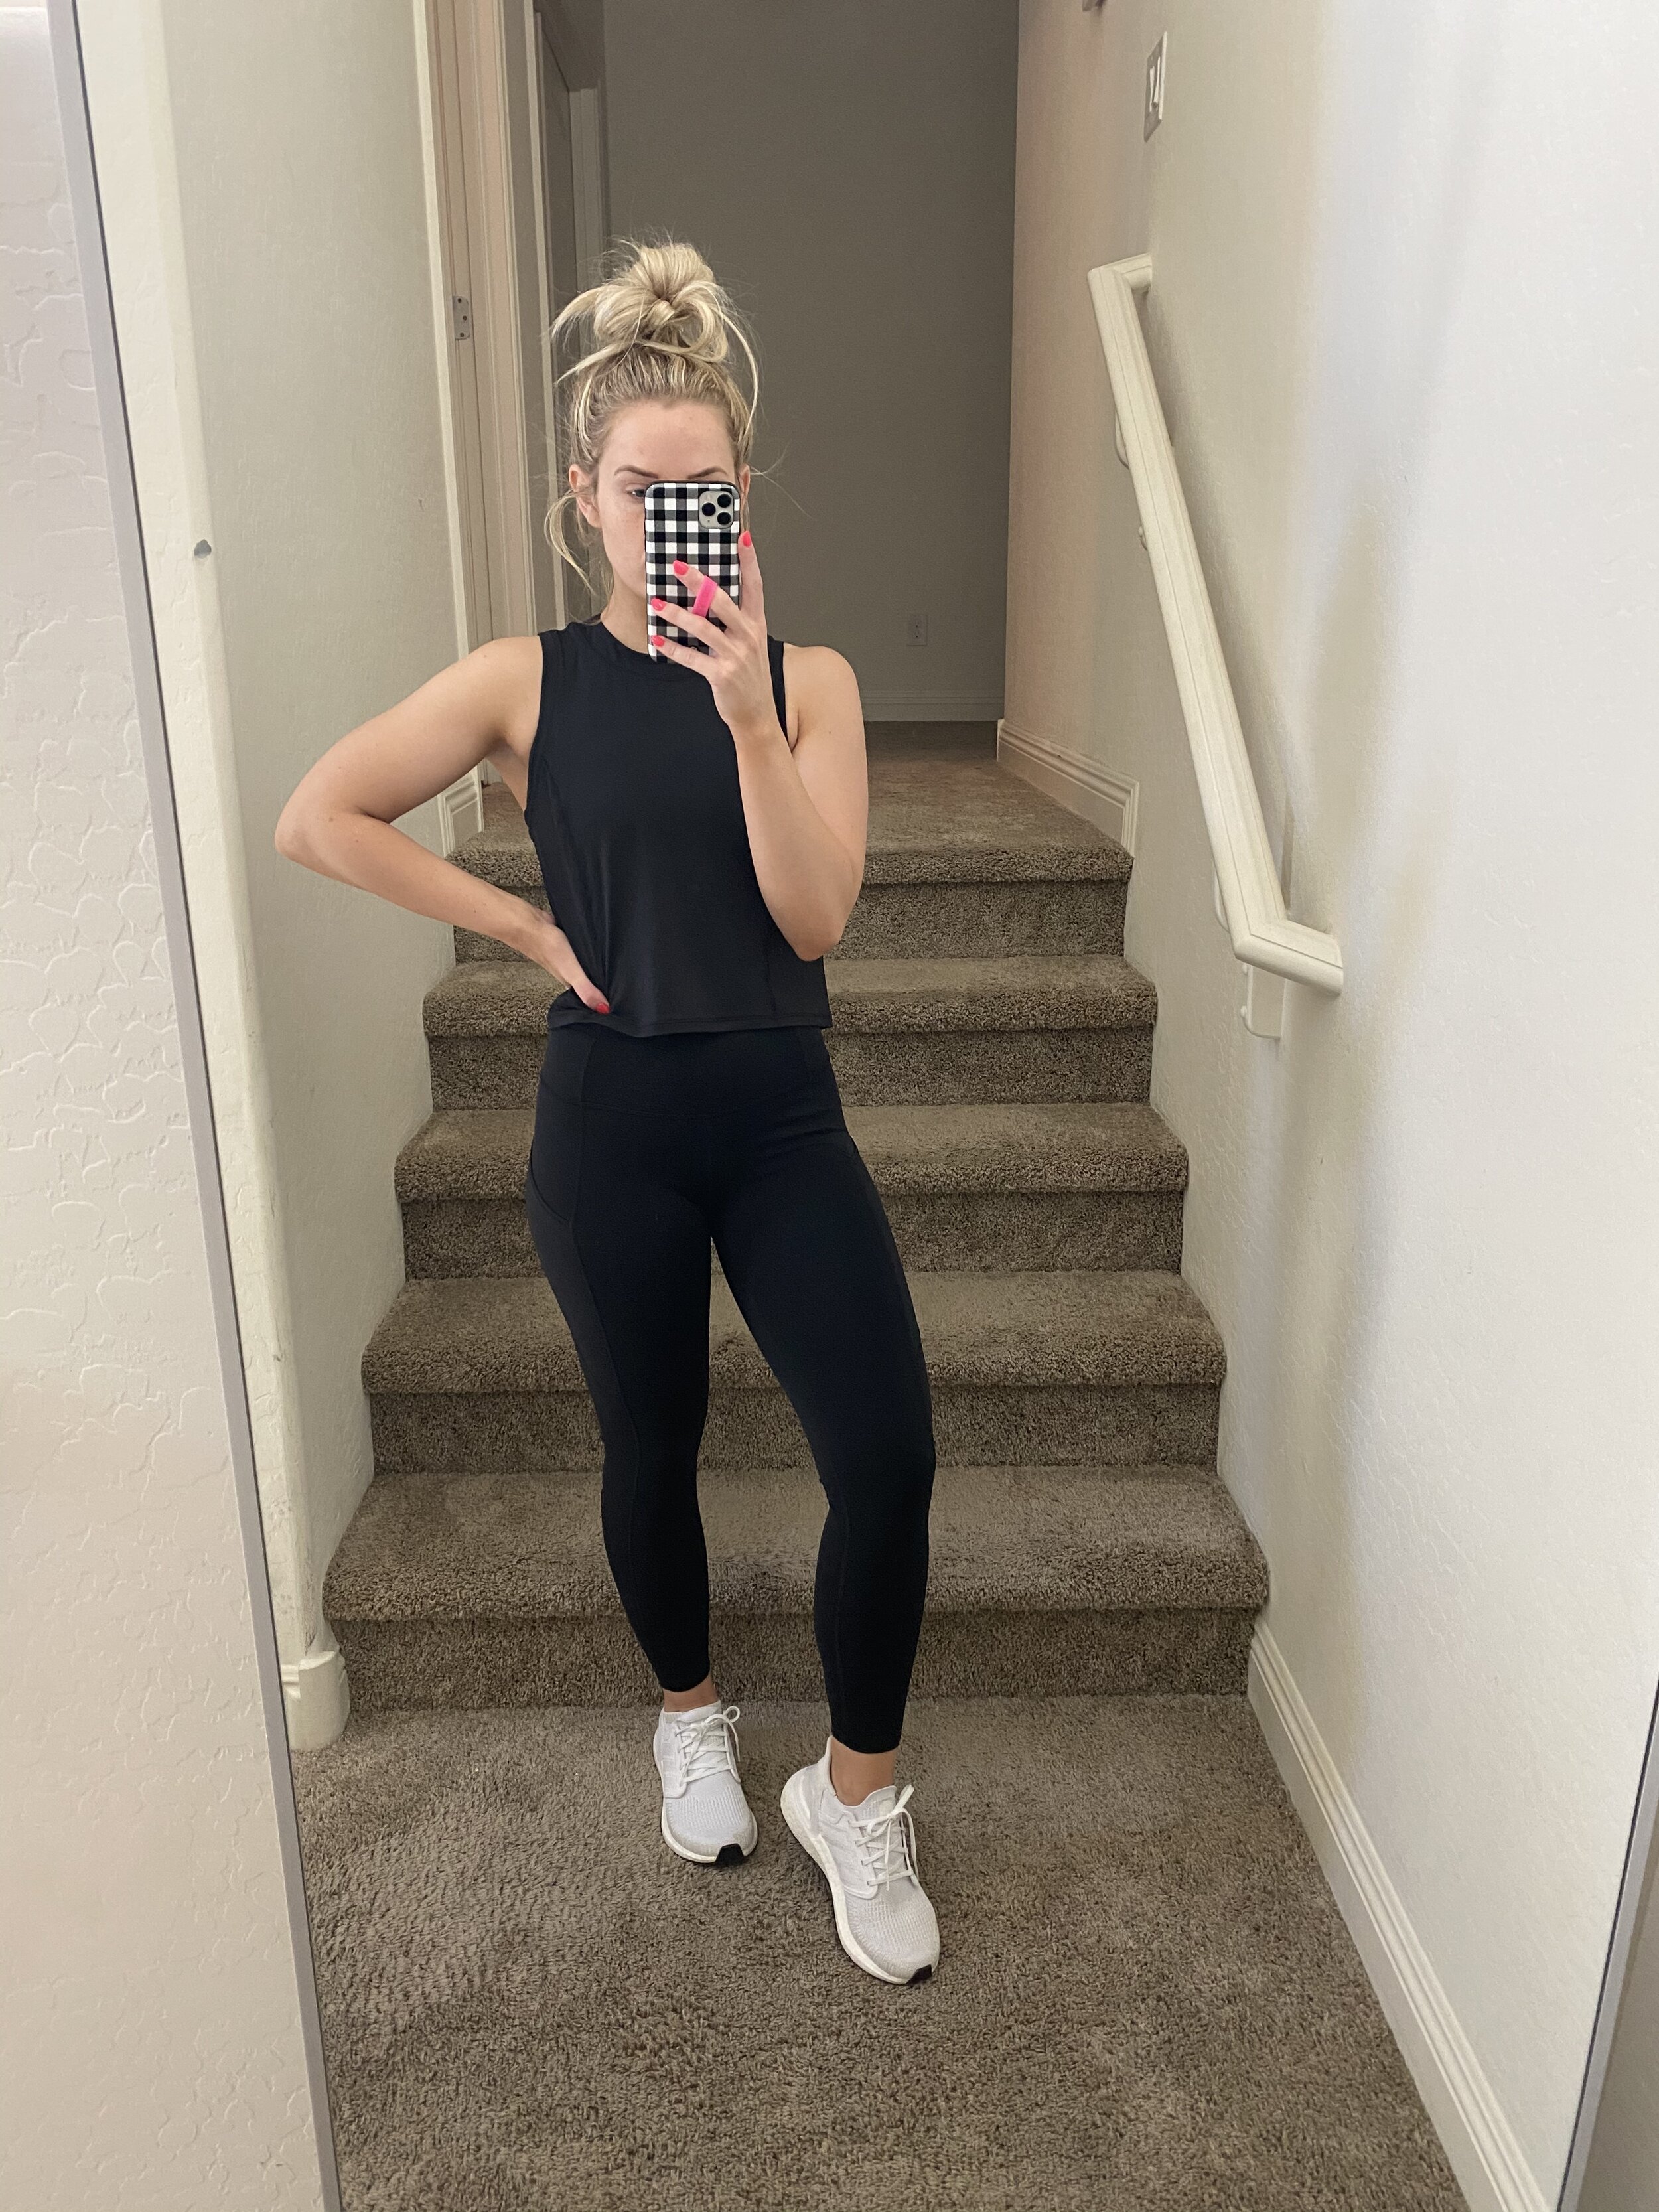 Save Your $$ With These Lululemon Dupes — KATIE ENOS BEAUTY